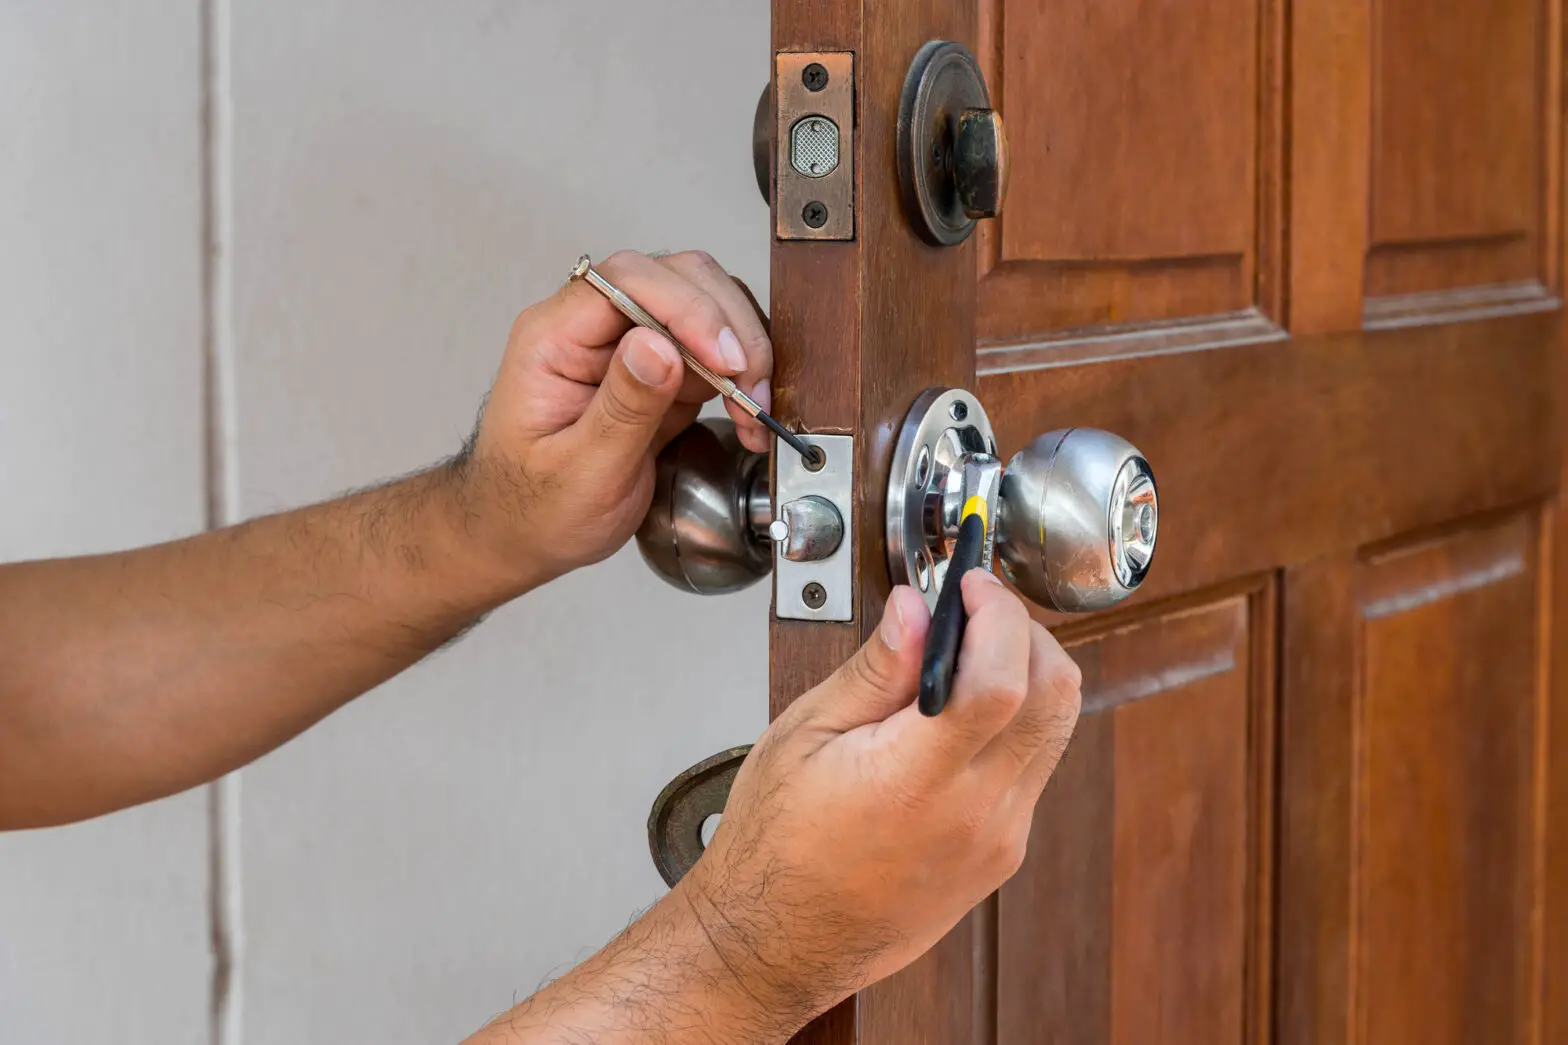 Can I Change the Locks on My Rental Apartment?